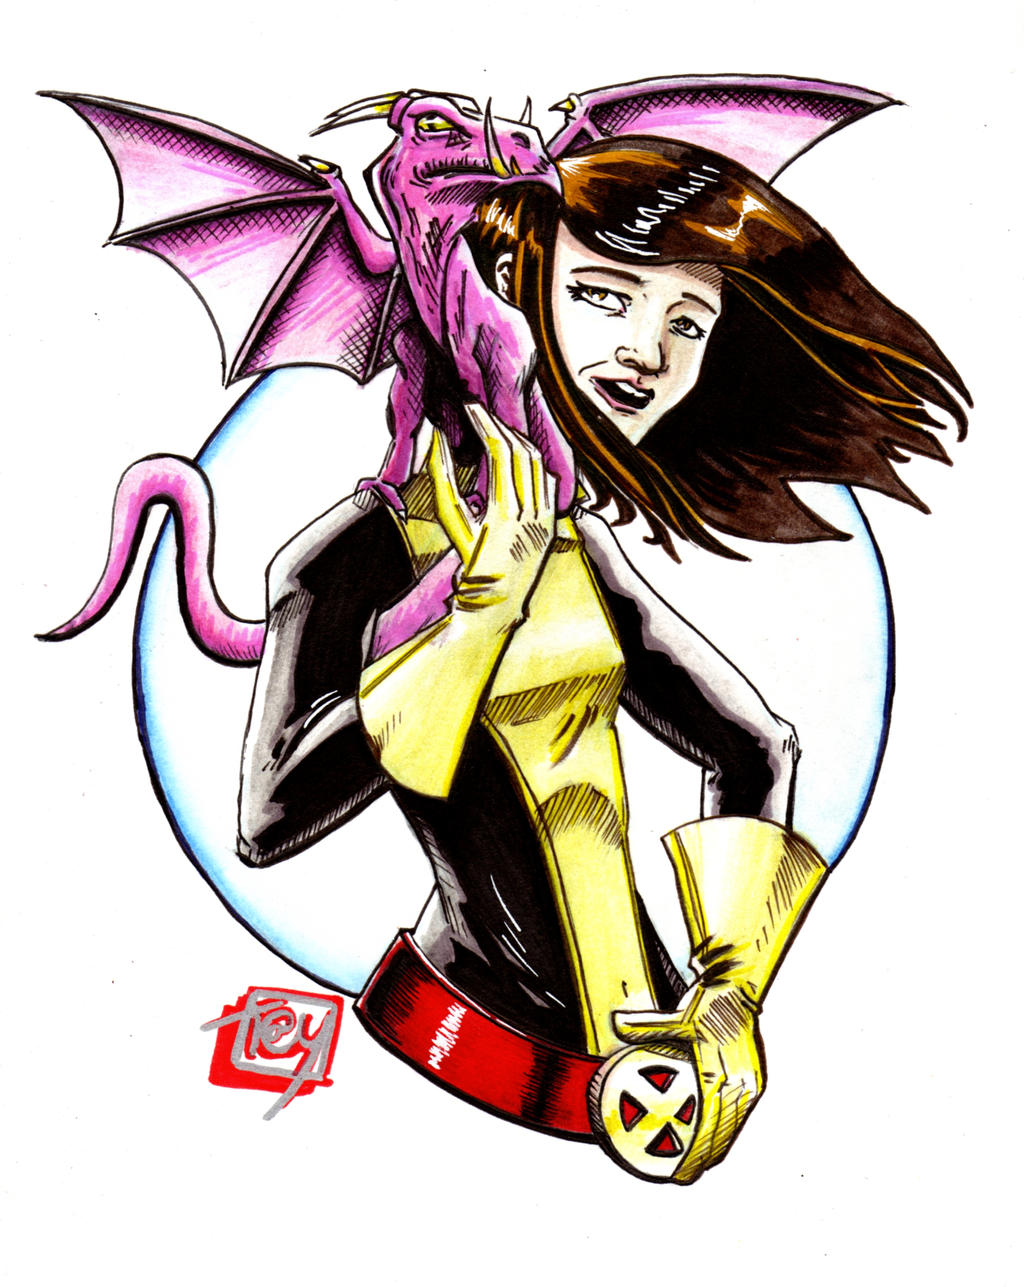 Reese as Kitty Pryde with Lockheed